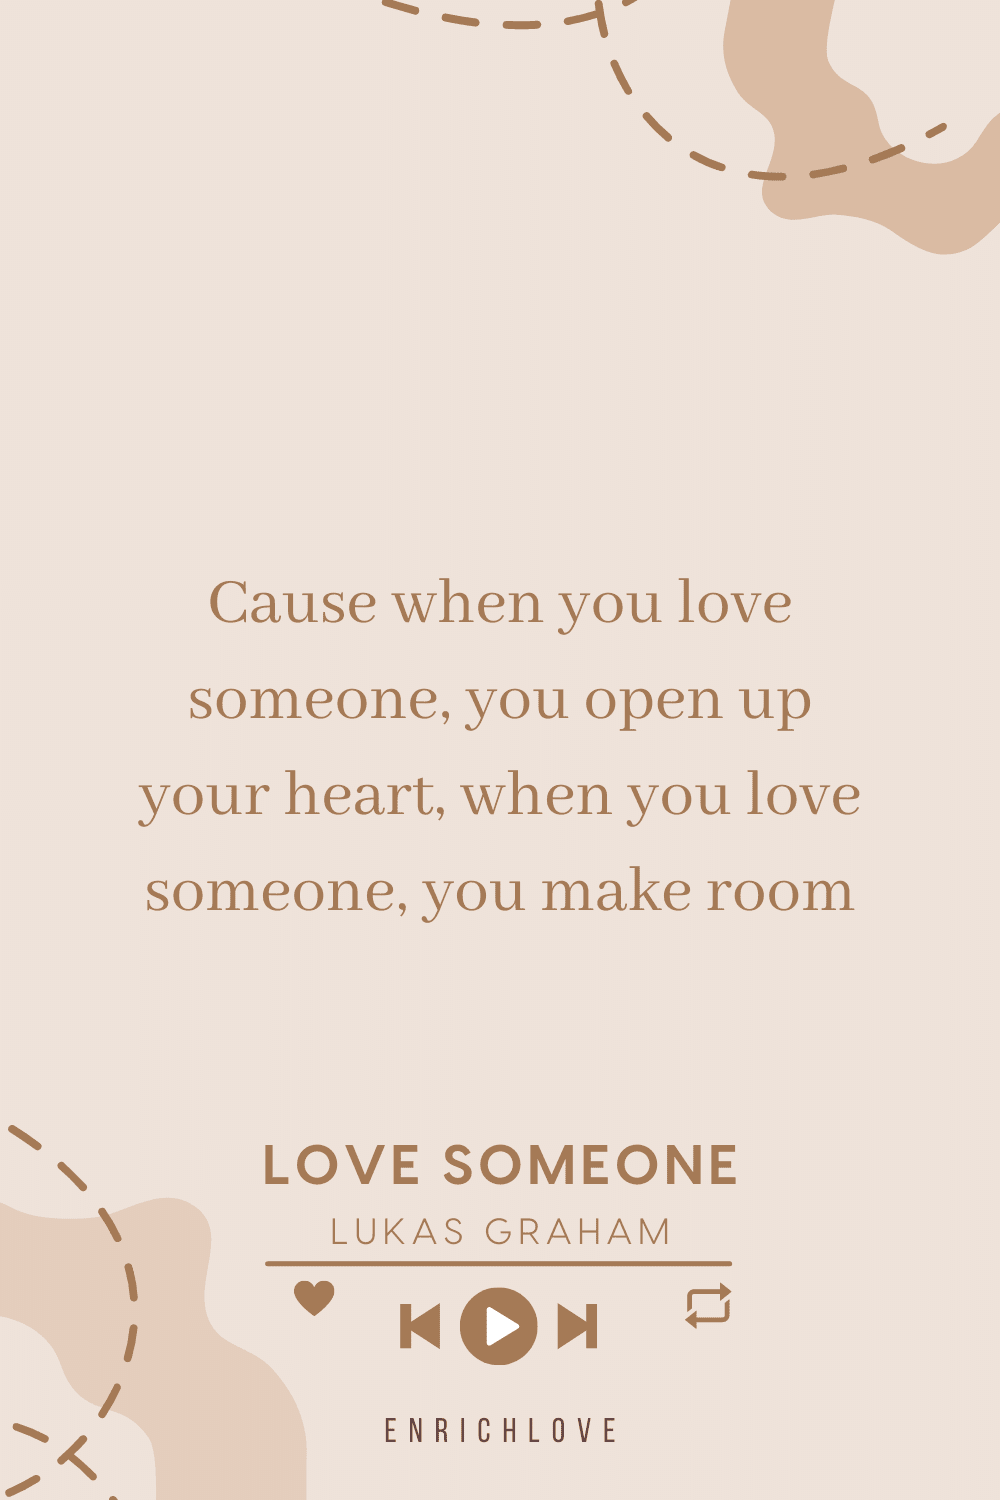 Cause when you love someone, you open up your heart, when you love someone, you make room